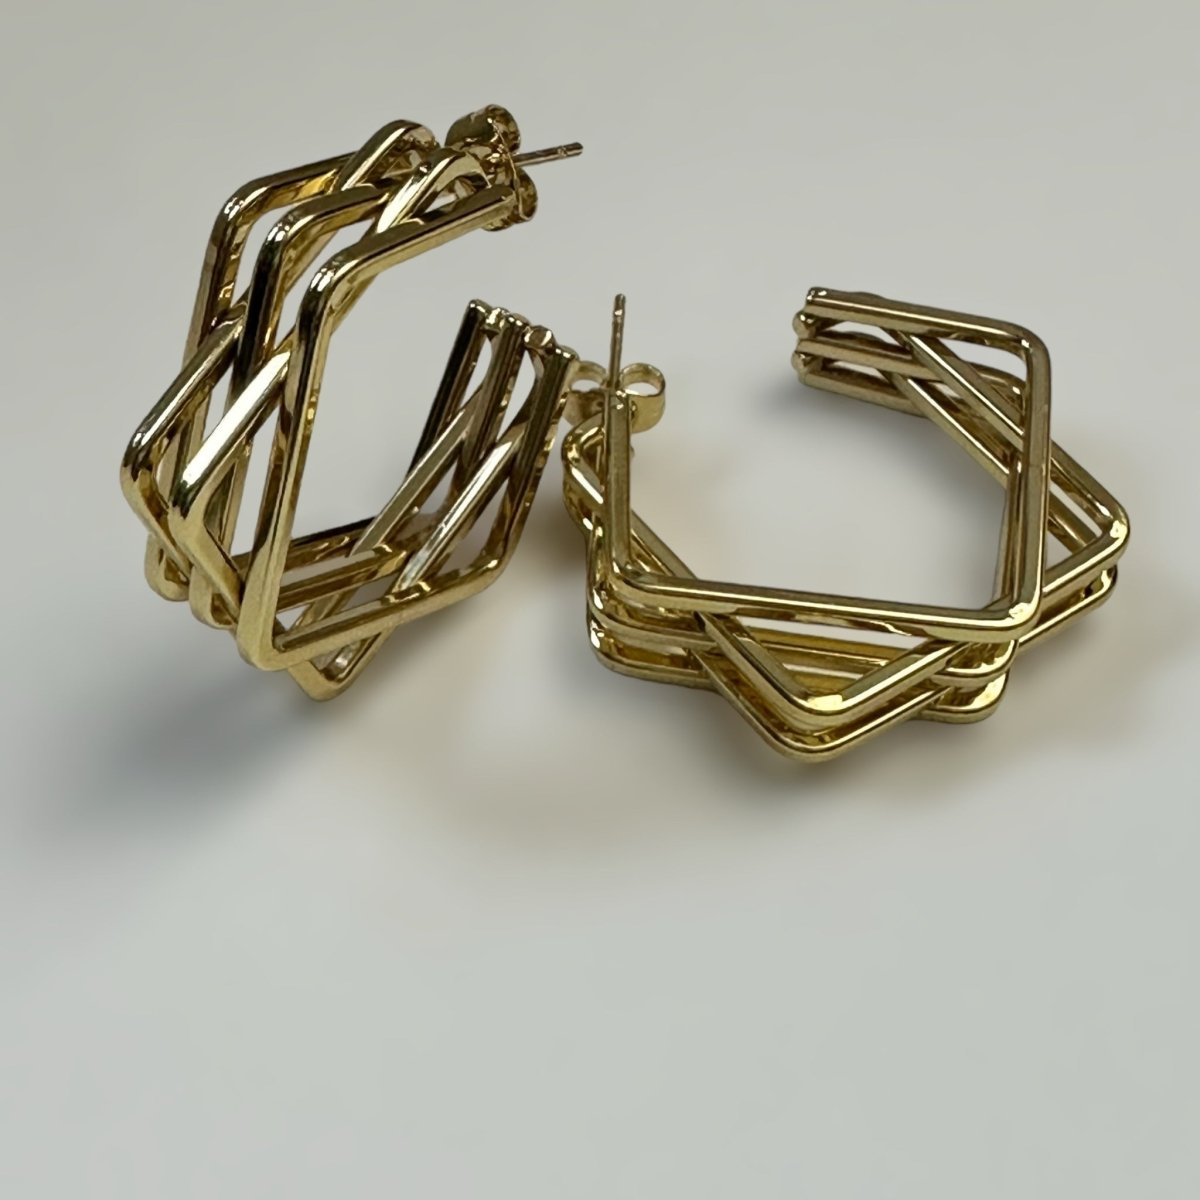 Close up, front and side view Women's stainless steel 18K gold plated Chloe earrings featuring a bold geometric shape, perfect for adding a fashionable edge to any outfit. Chloe Earrings - B-Xquisite Jewelry Earrings